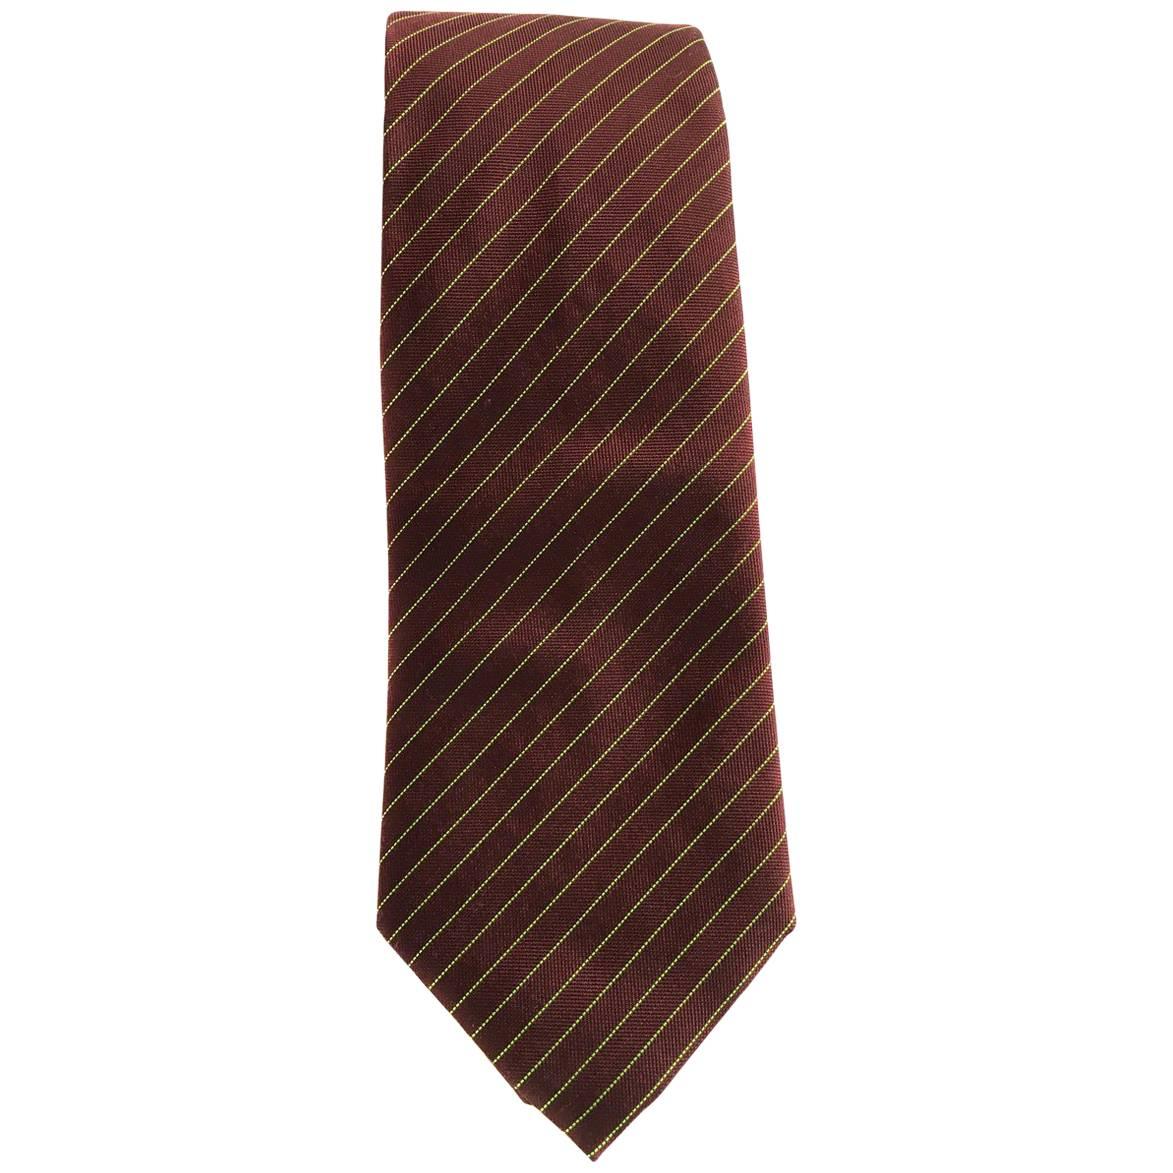 HERMES Tie in Burgundy Silk and Cashmere with Fluorescent Green lines